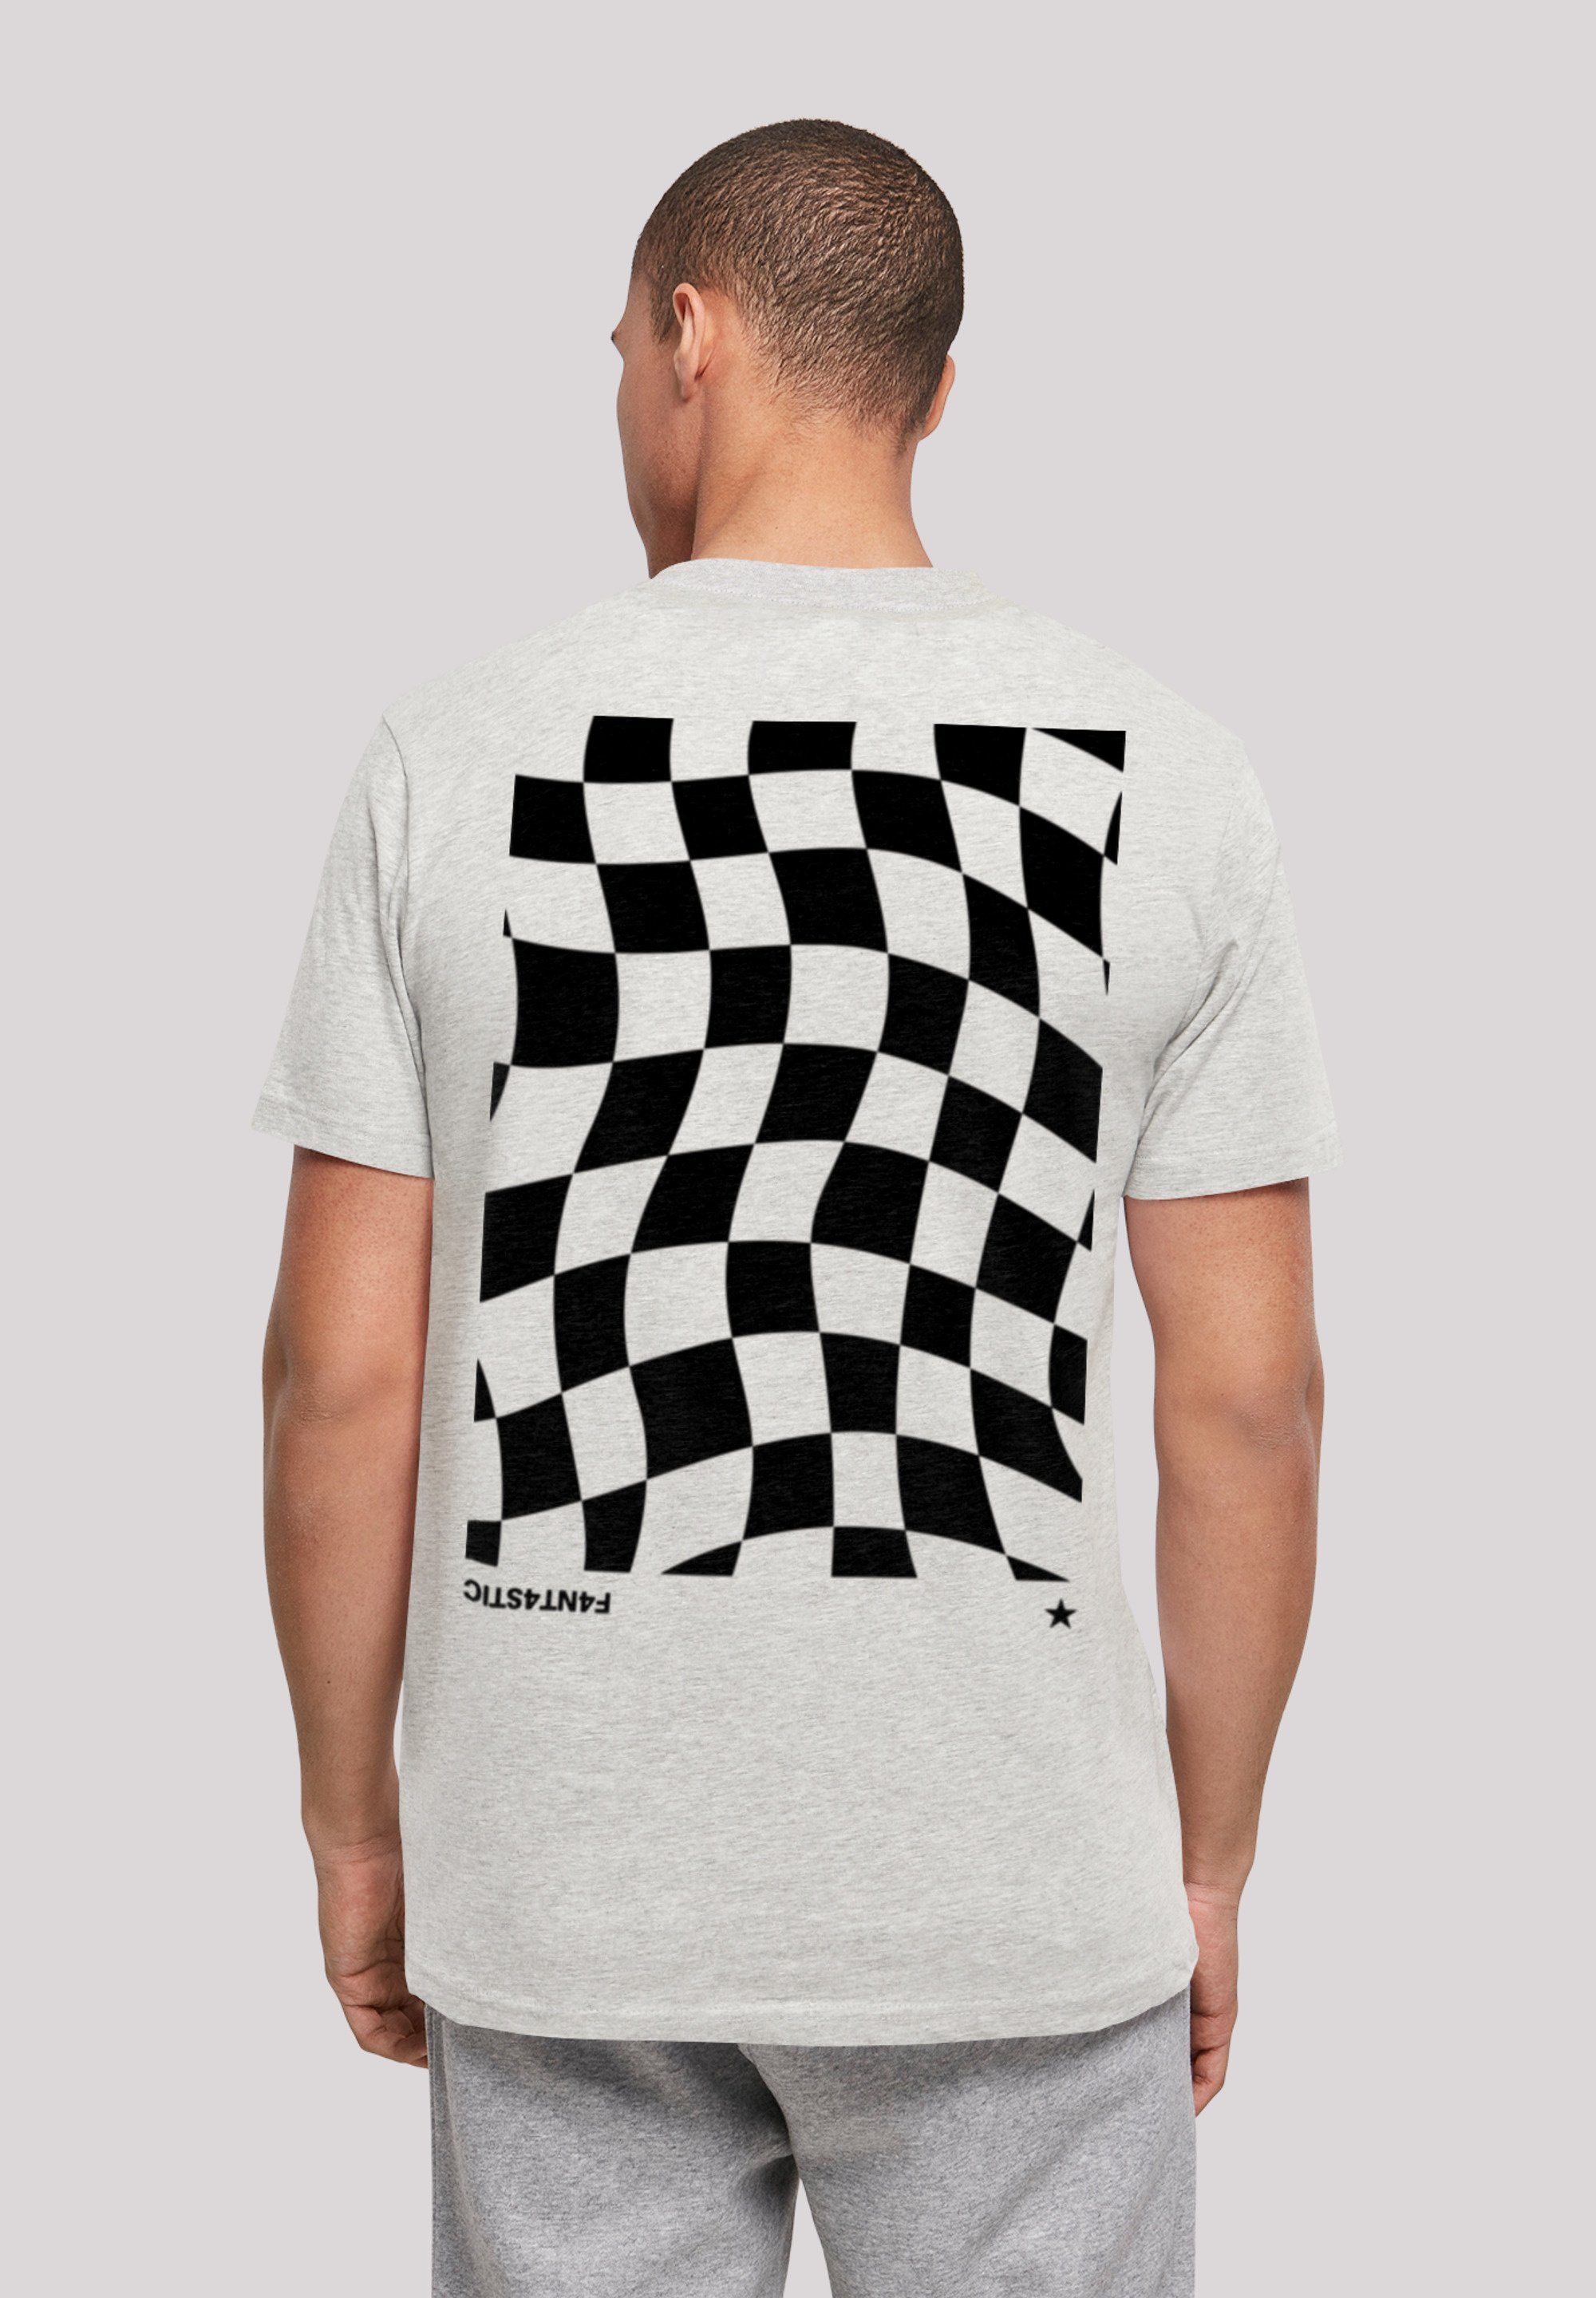 F4NT4STIC T-Shirt Wavy Schach Muster grey Print heather